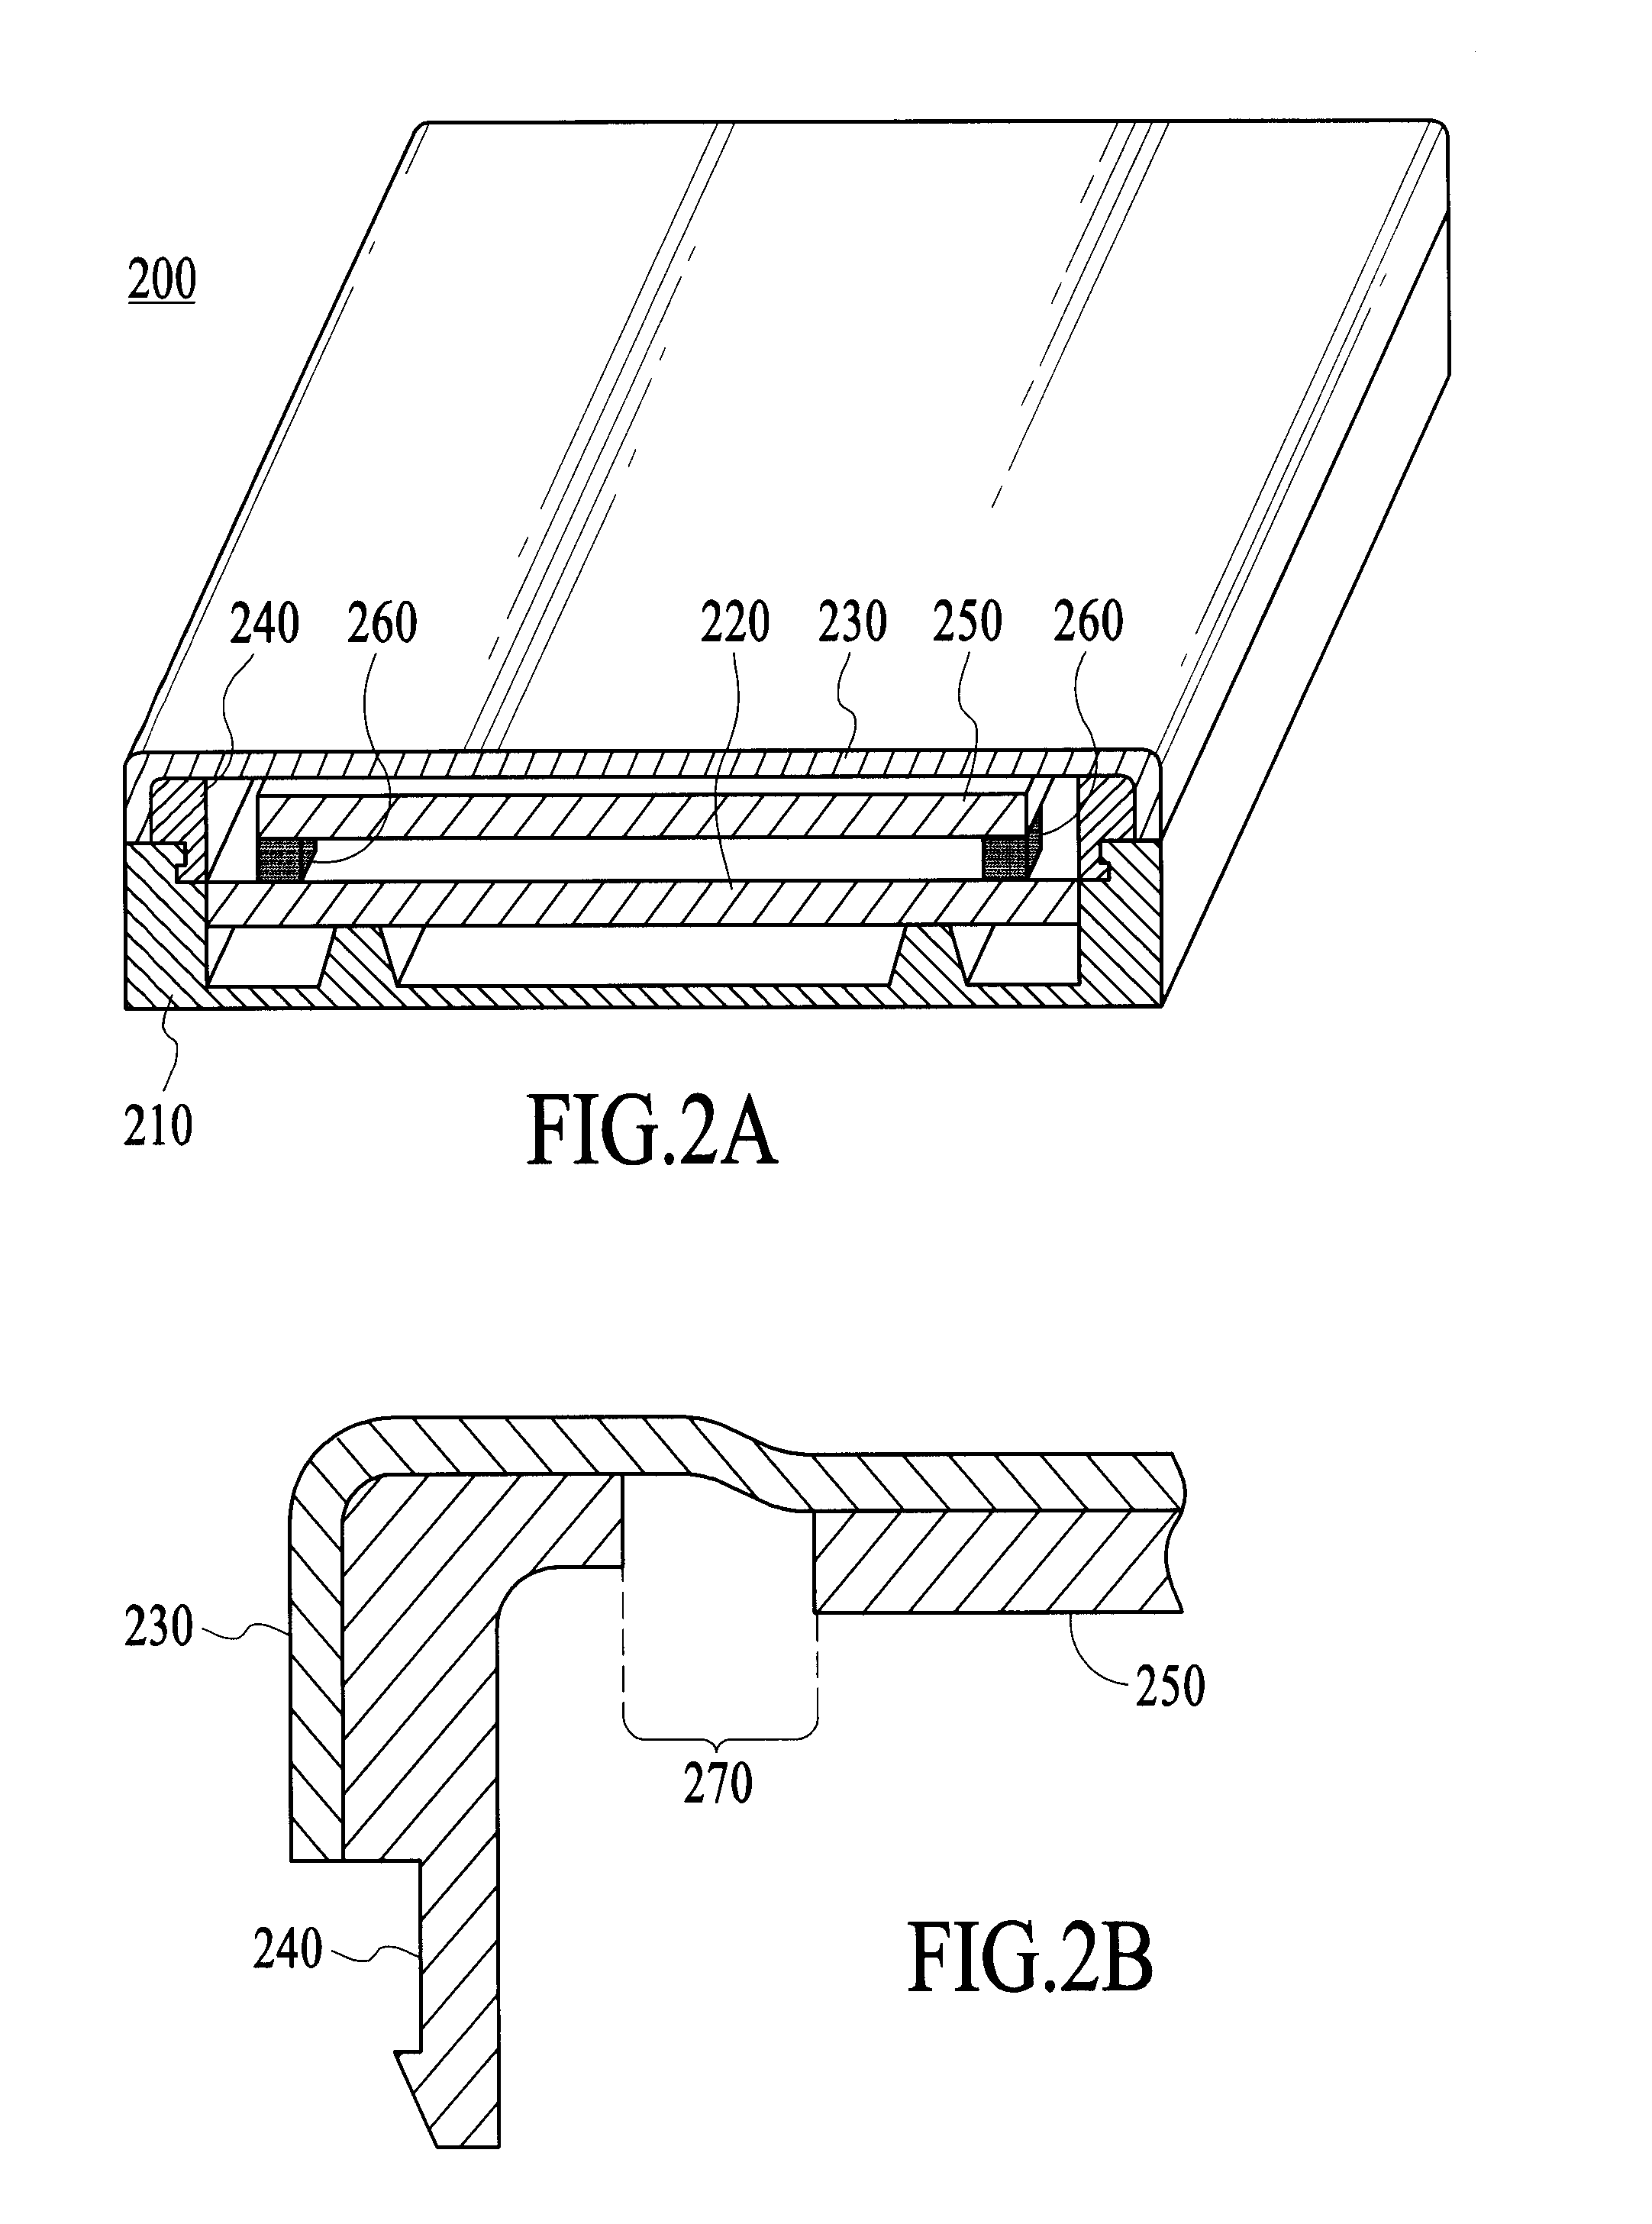 Single-piece top surface display layer and integrated front cover for an electronic device